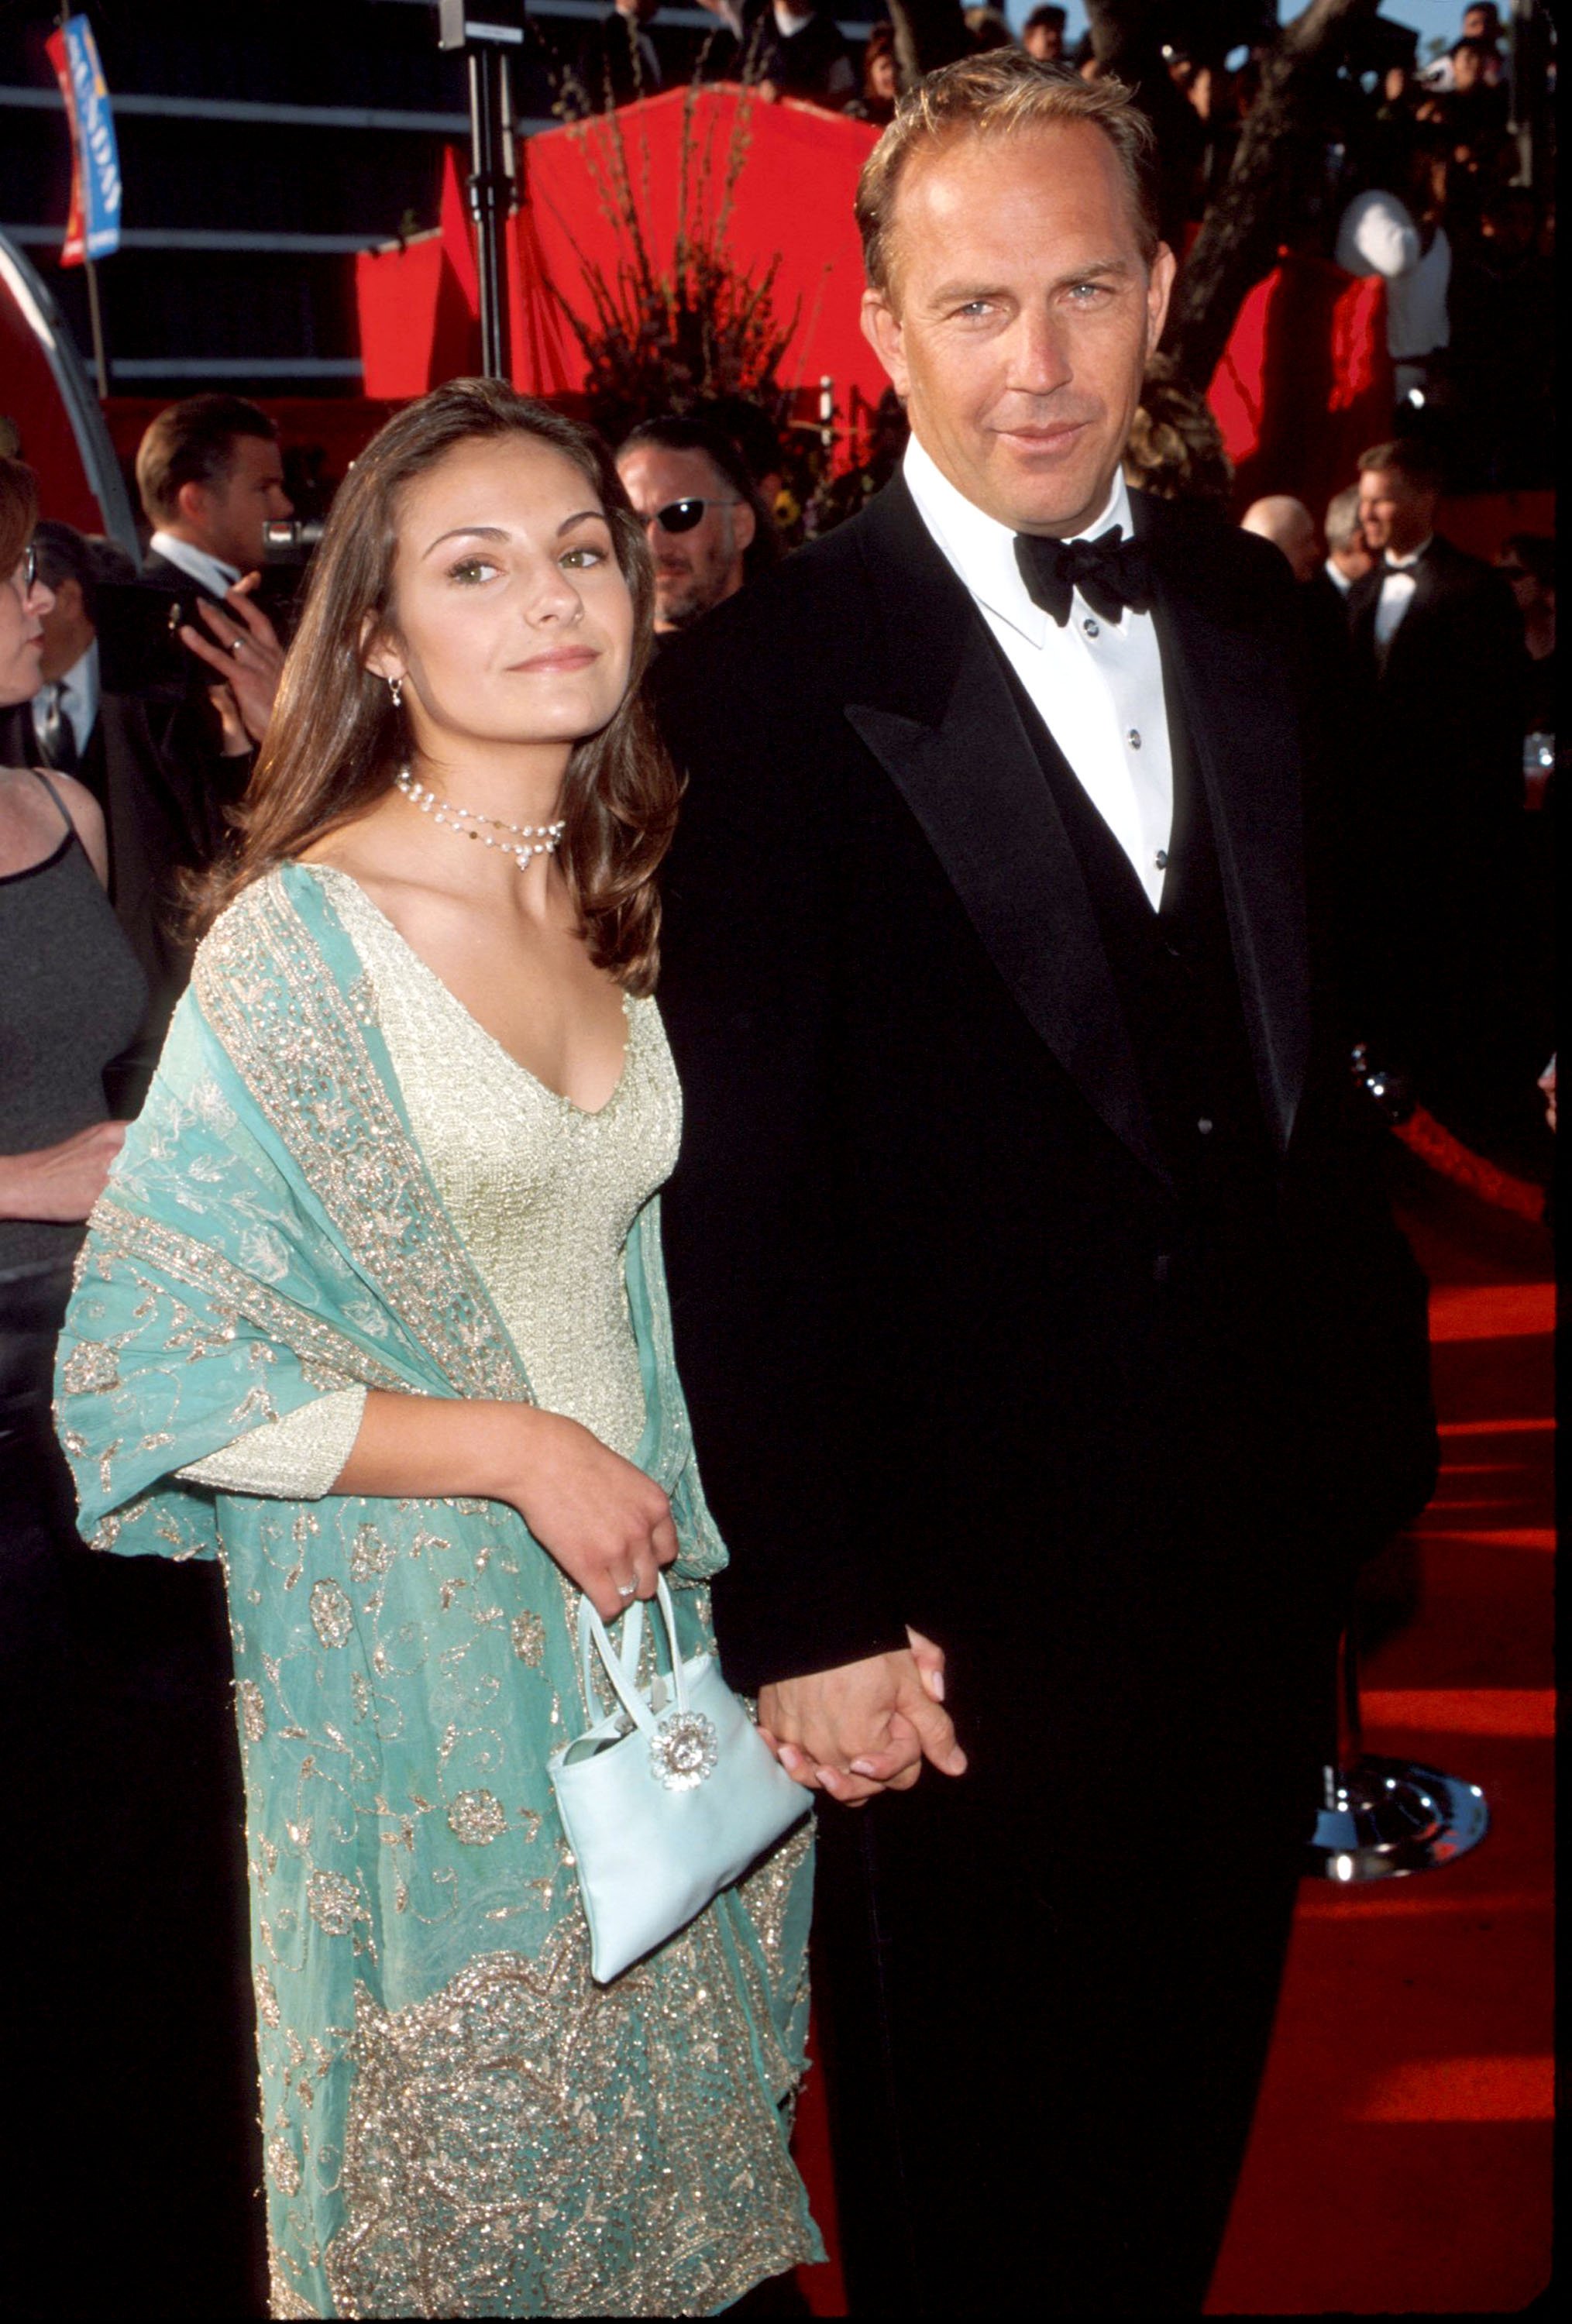 Annie and Kevin Costner at the 71st Annual Academy Awards in Los Angeles, California on March 21, 1999. |  Source: Getty Images